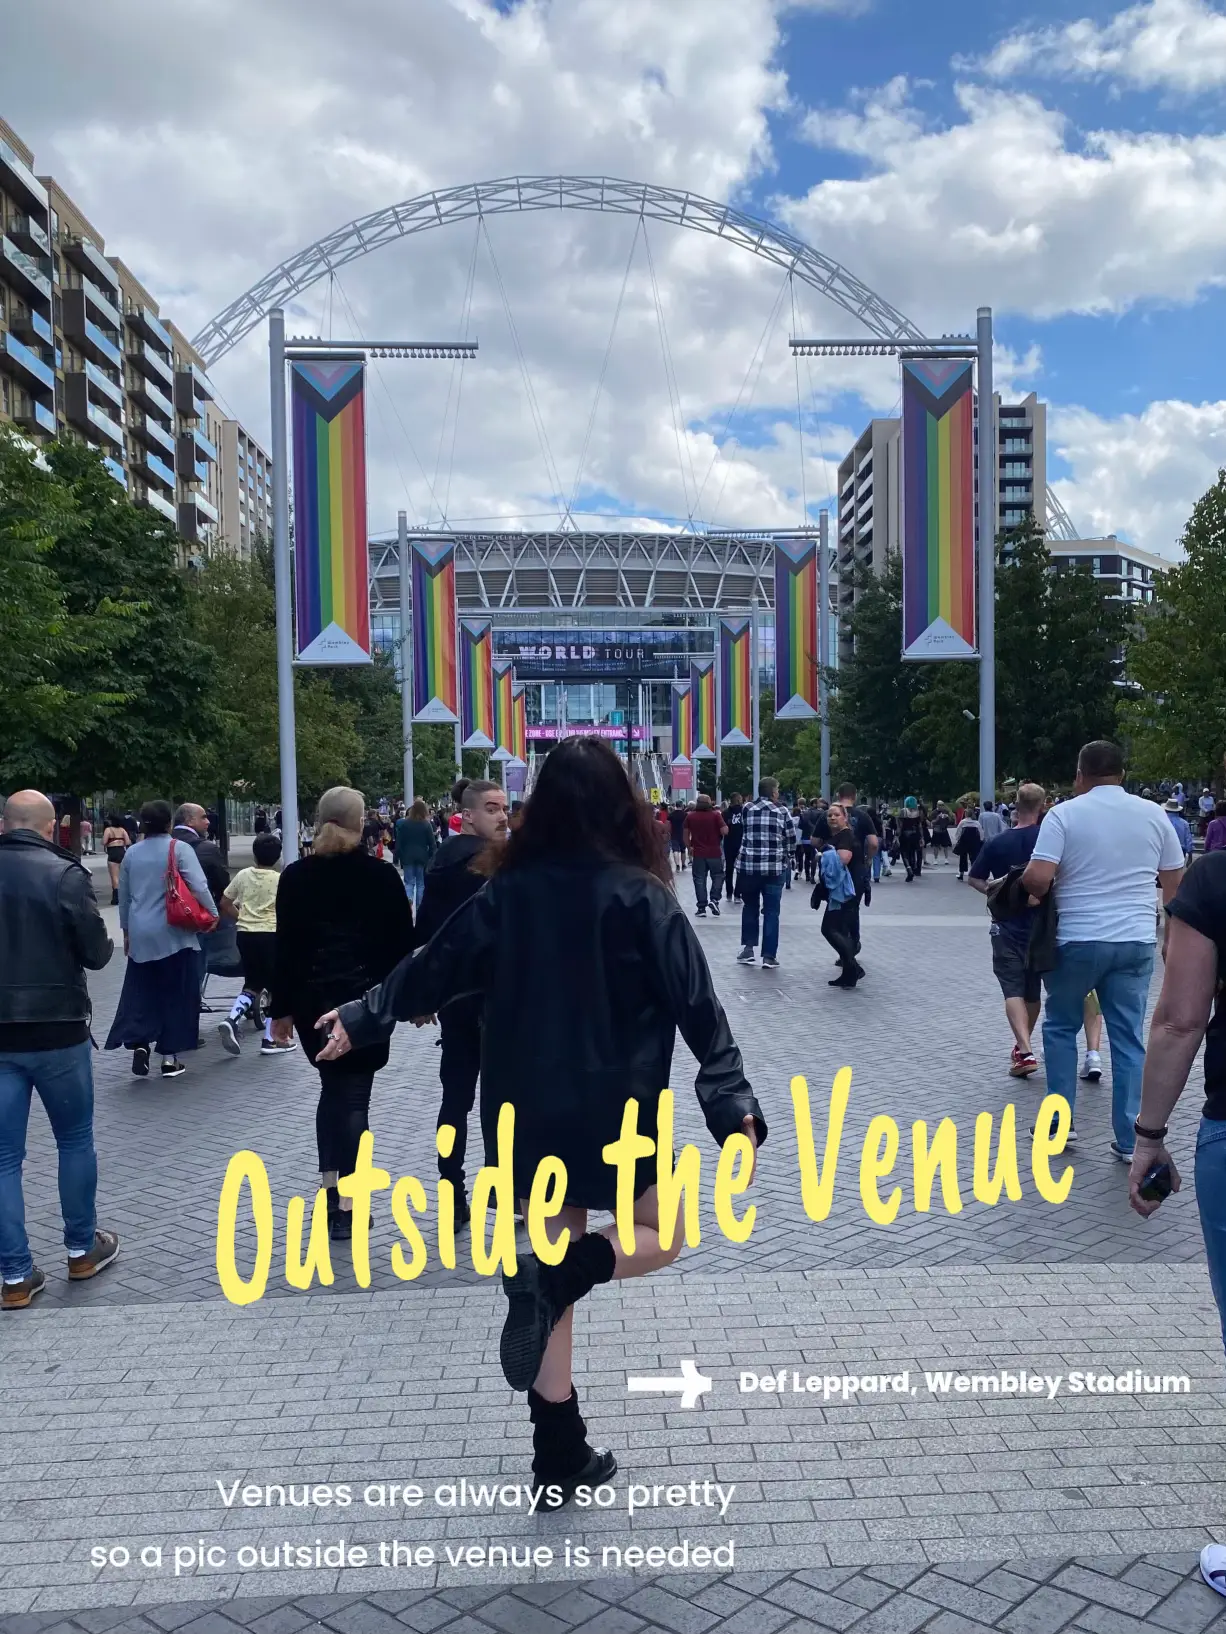  A woman is walking down a sidewalk with a sign that says "Outside the Venue"